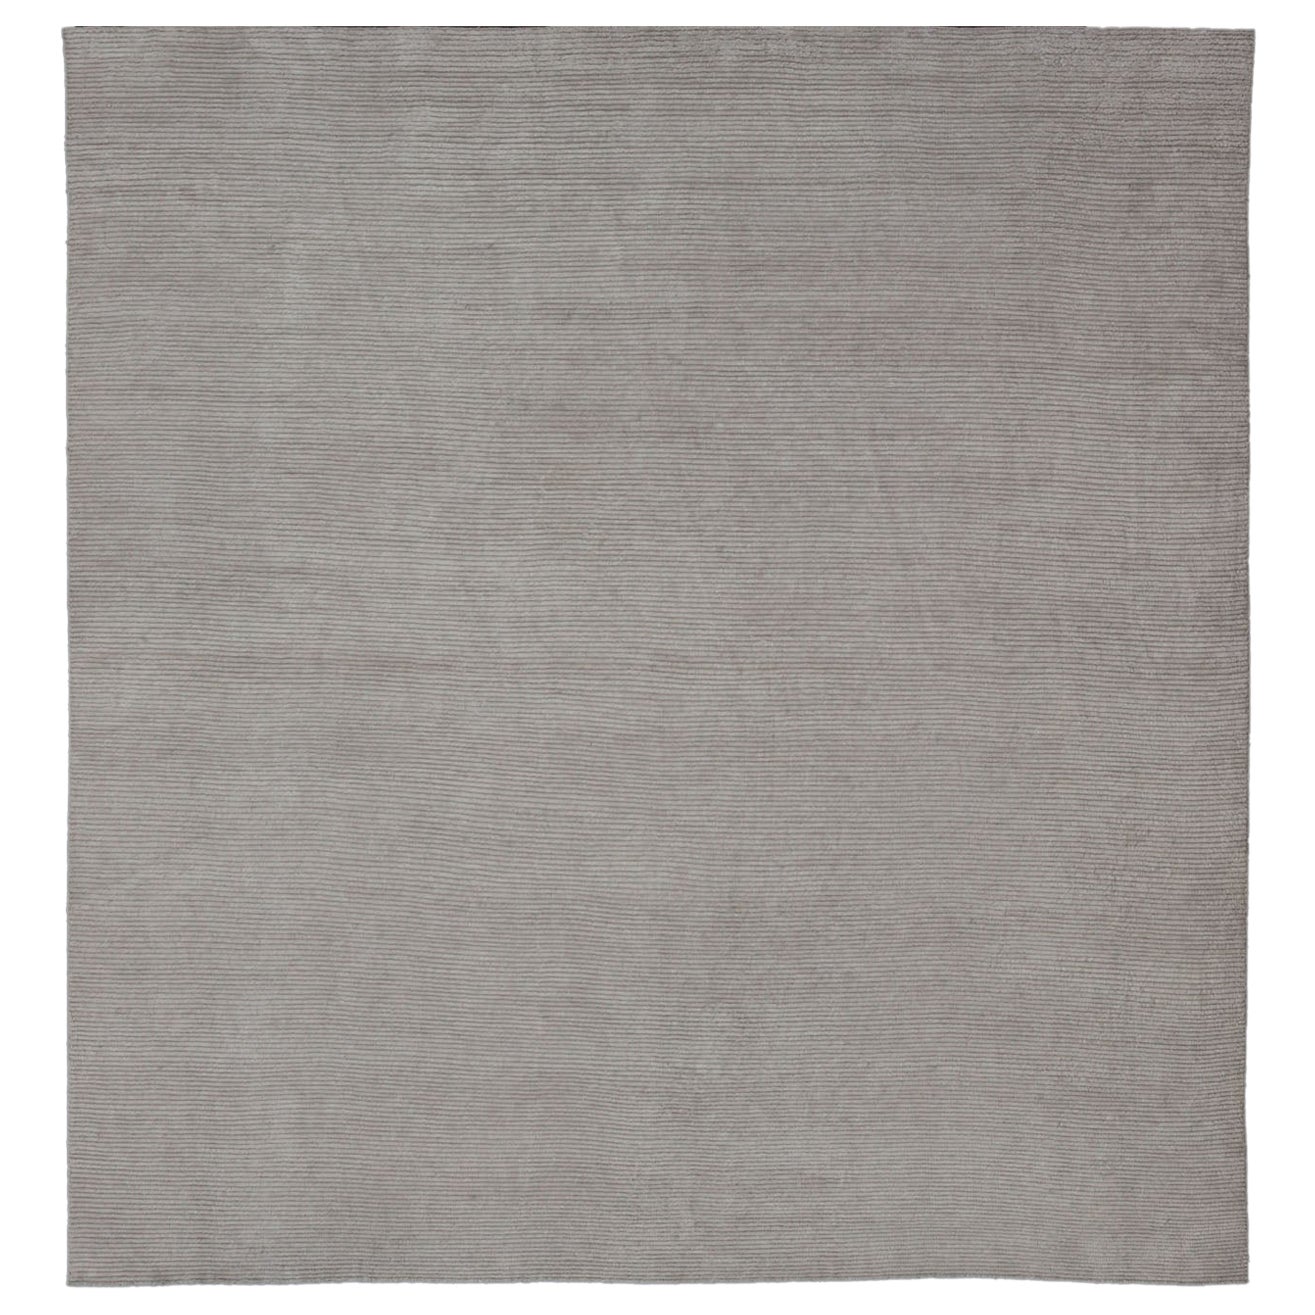 Large Square Modern Rug with Minimalist  Design in off White and Beige For Sale